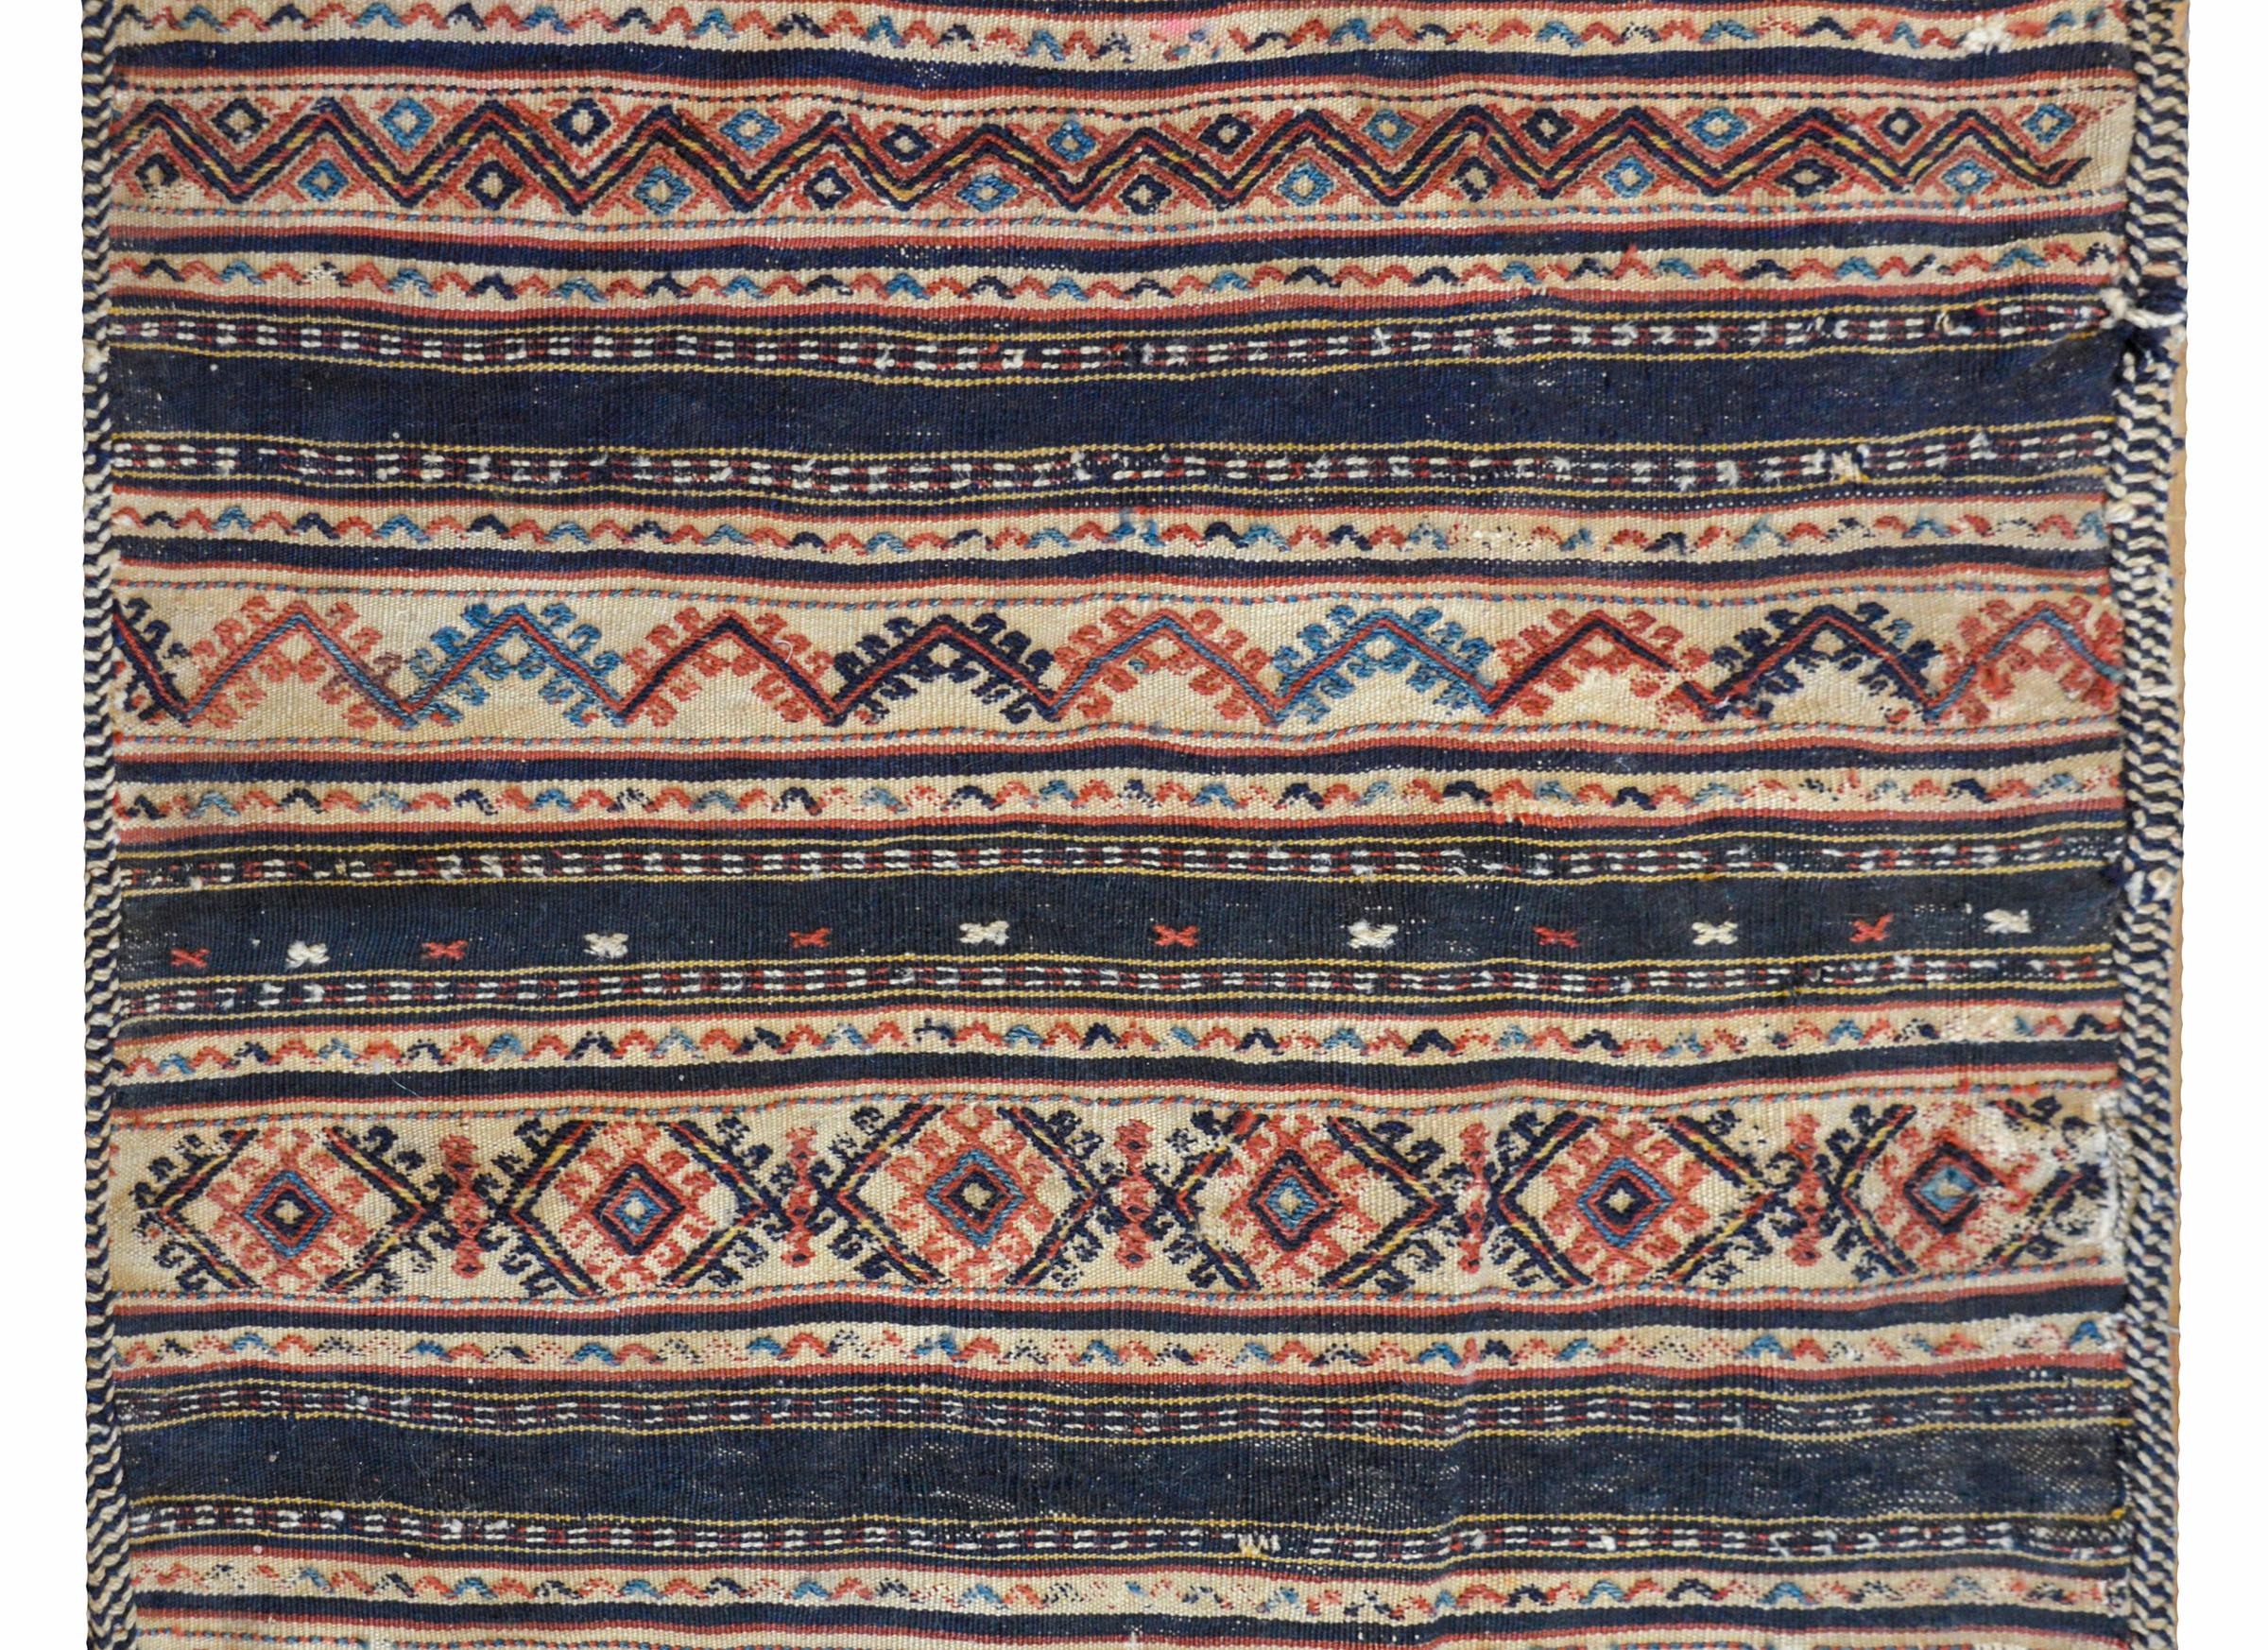 Rare Early 20th Century Lori Horse Blanket For Sale 1